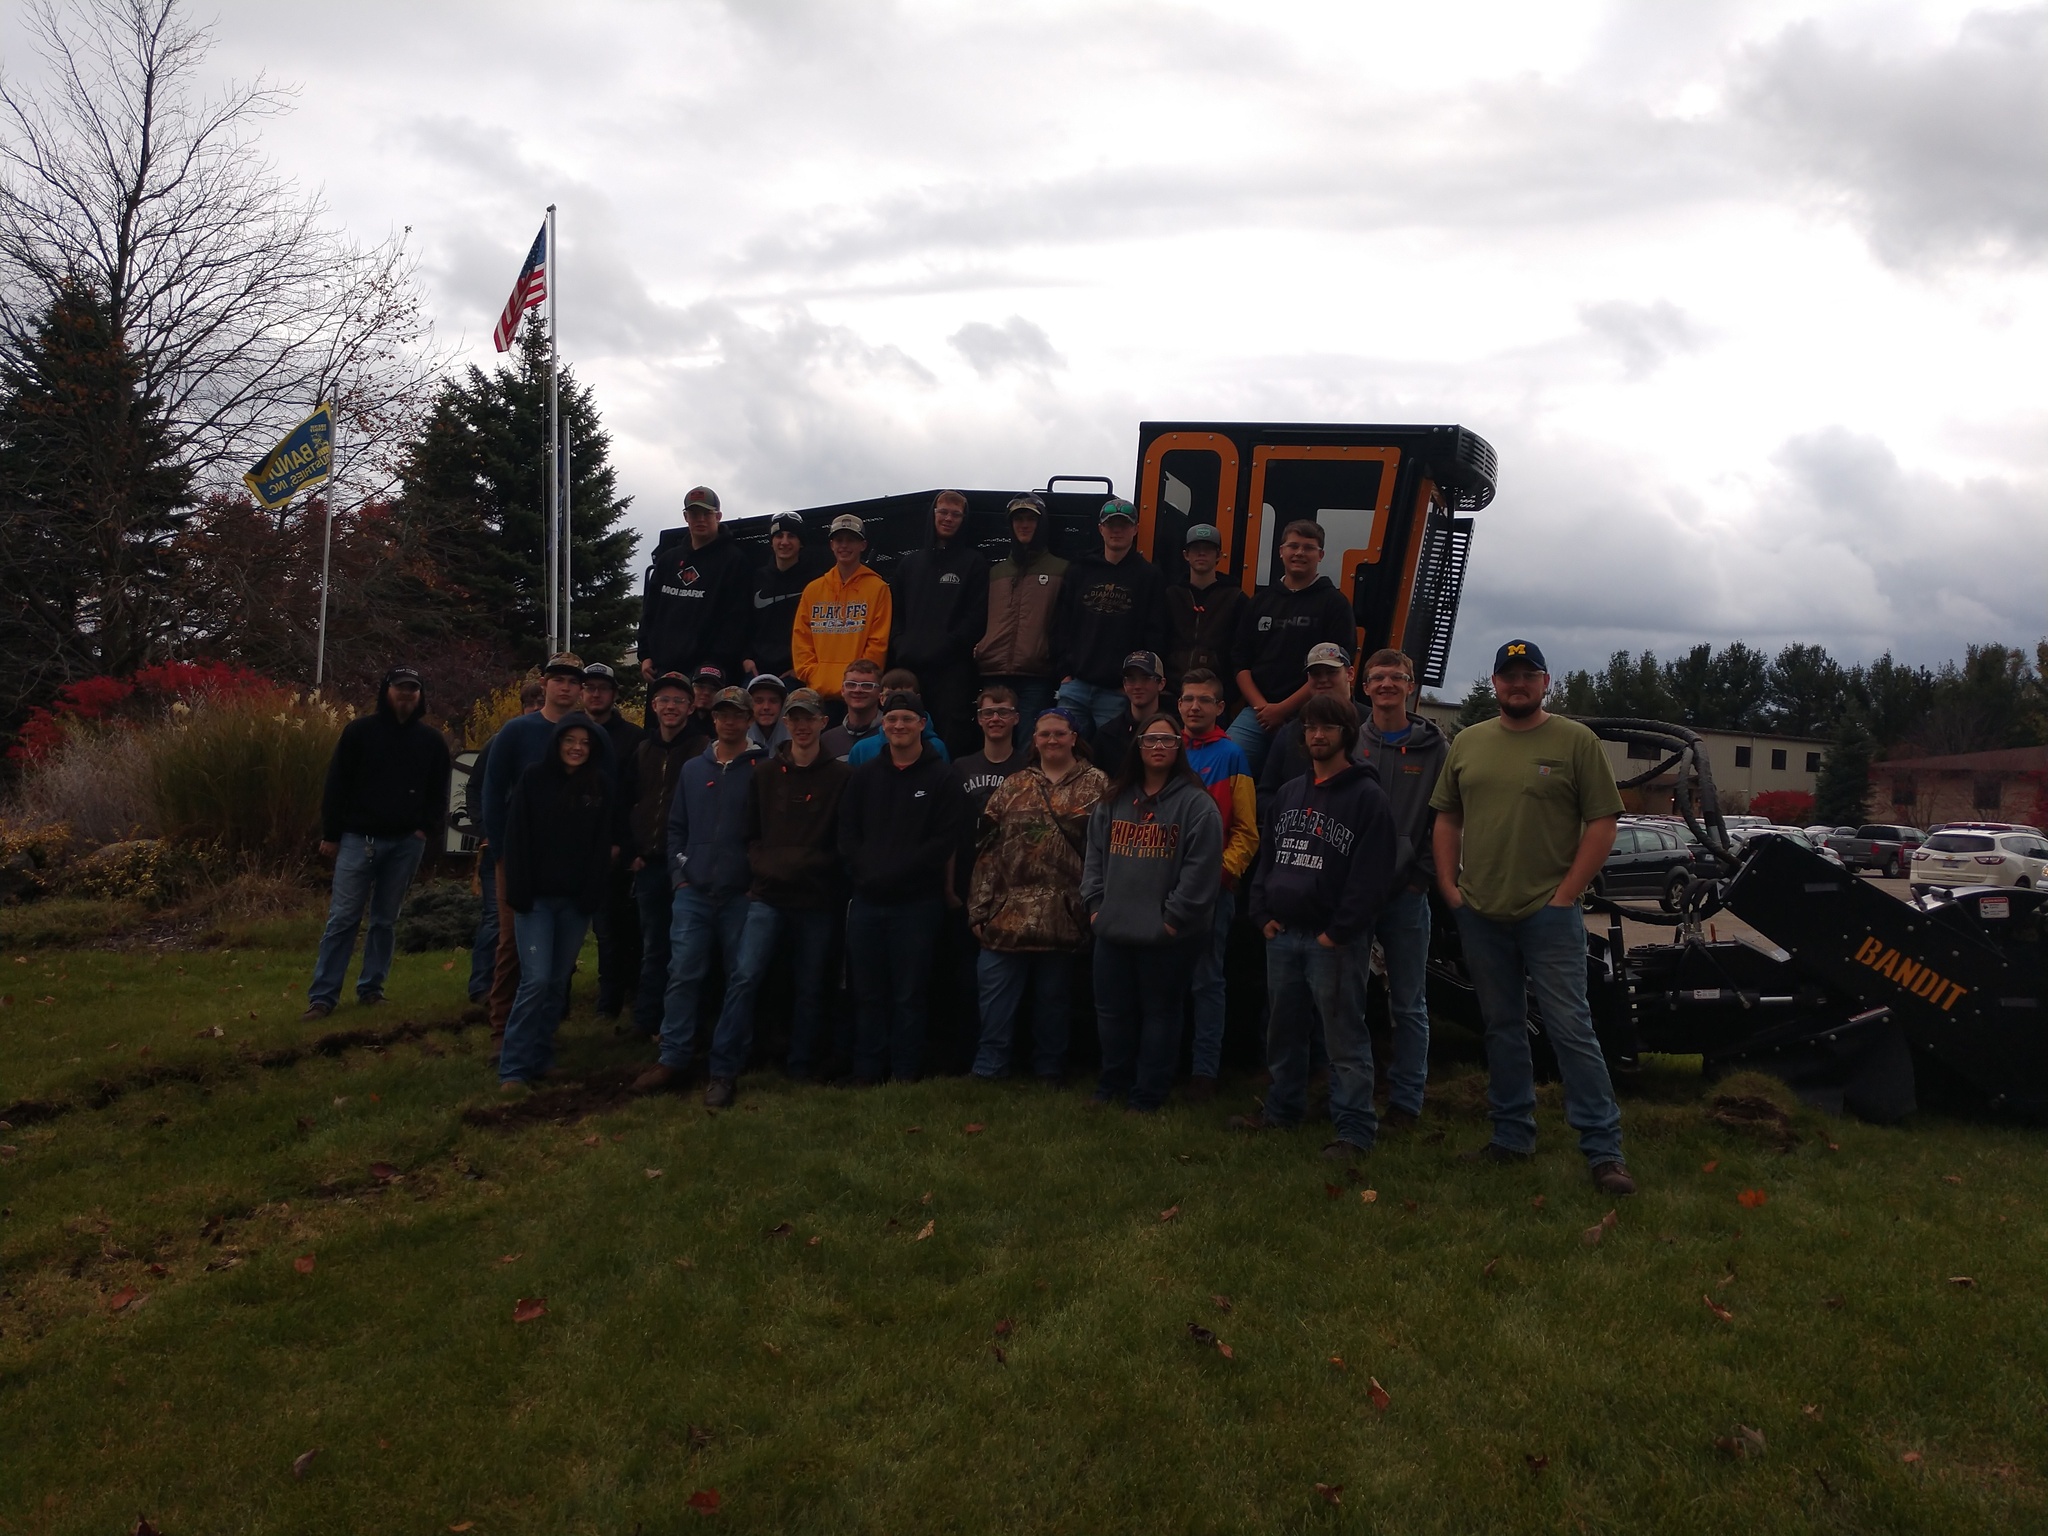 A picture of the welding field trip to Bandit Industries.